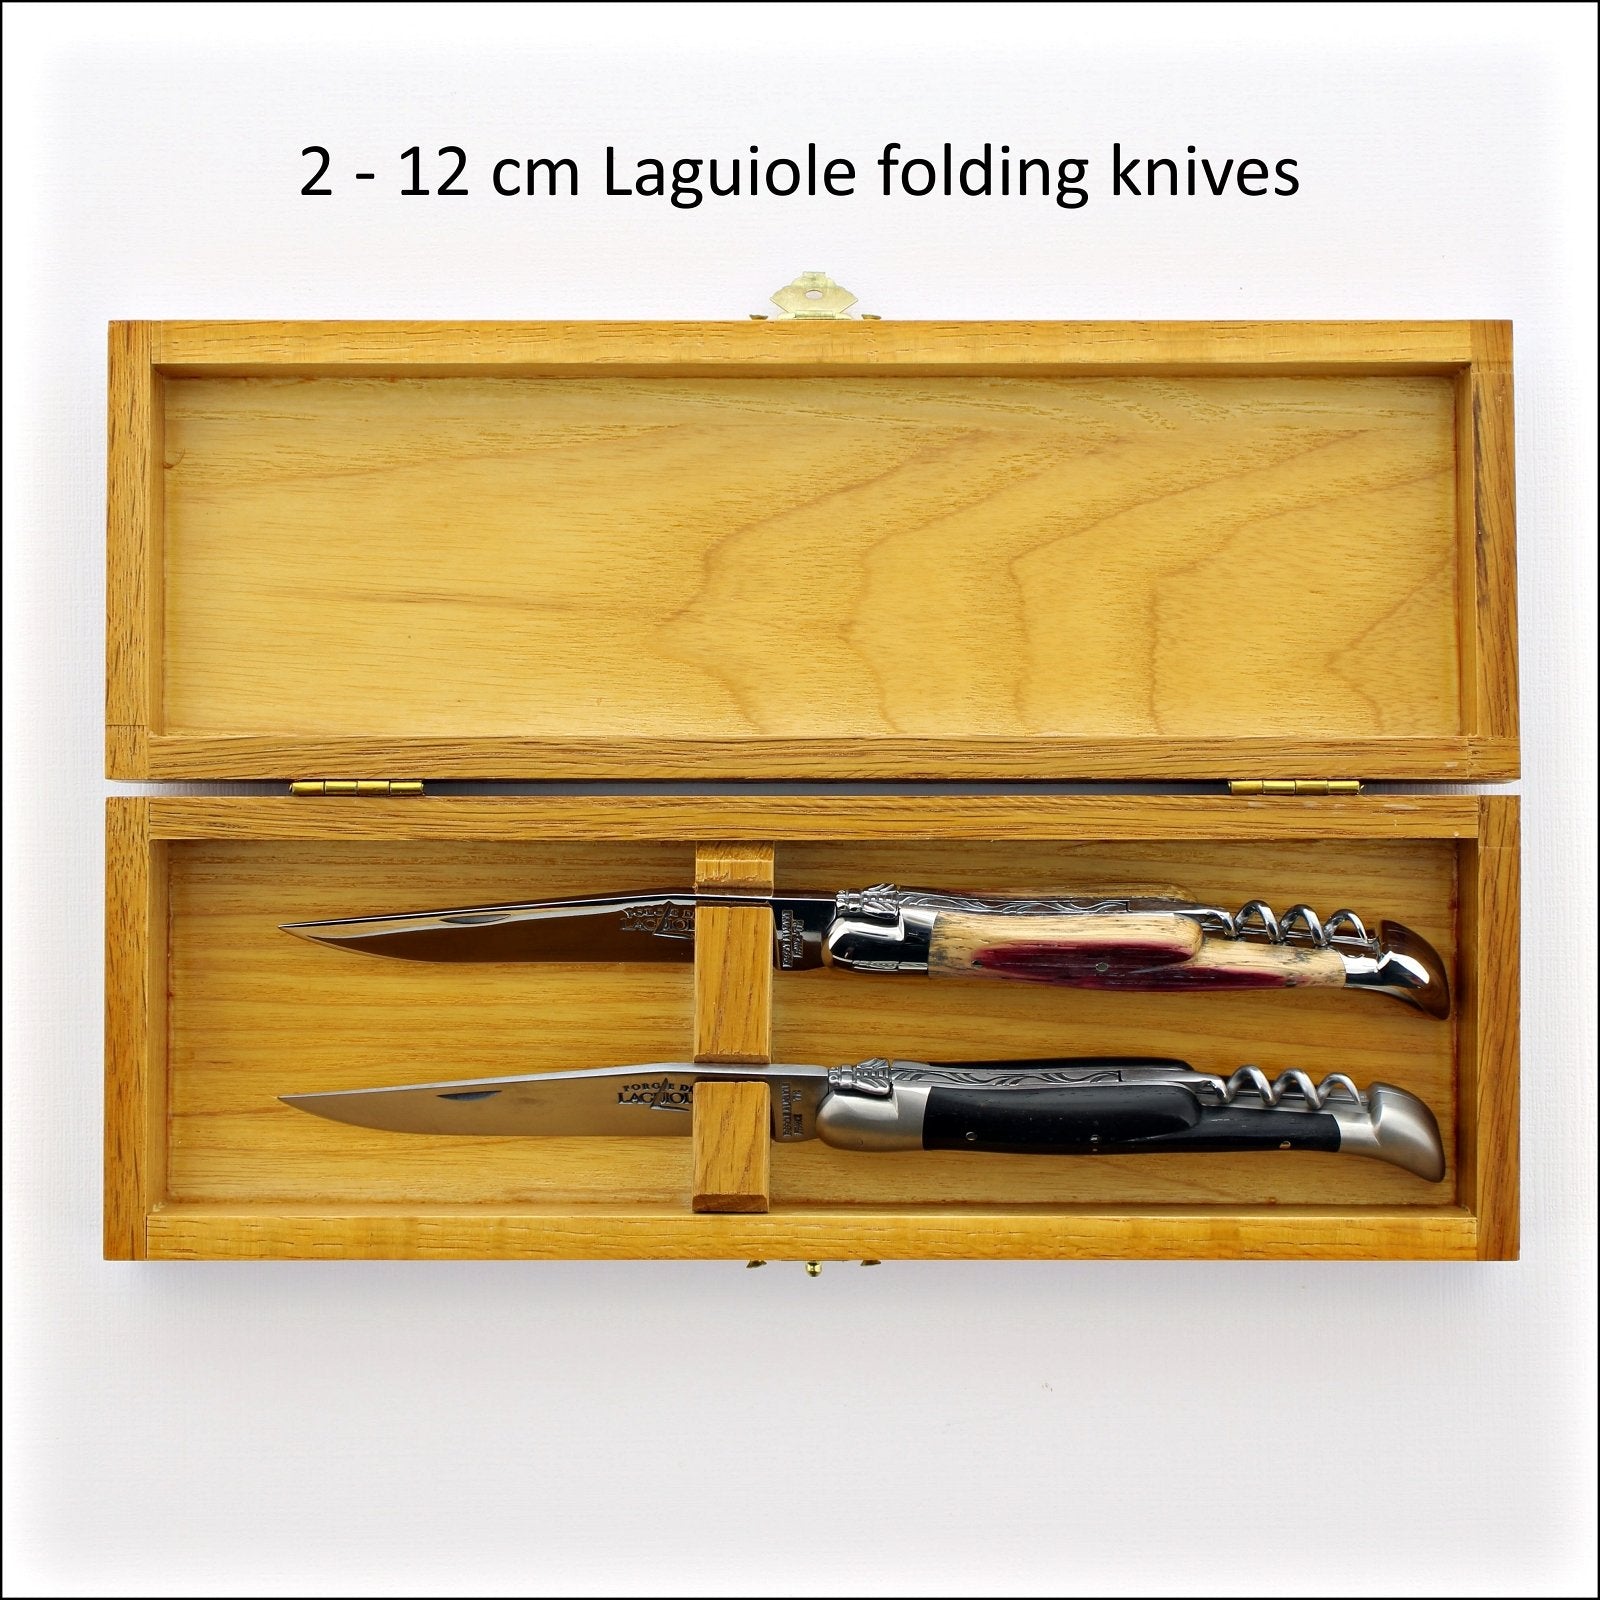 Wooden Storage Box for 2 Steak Knives or Folding Knives